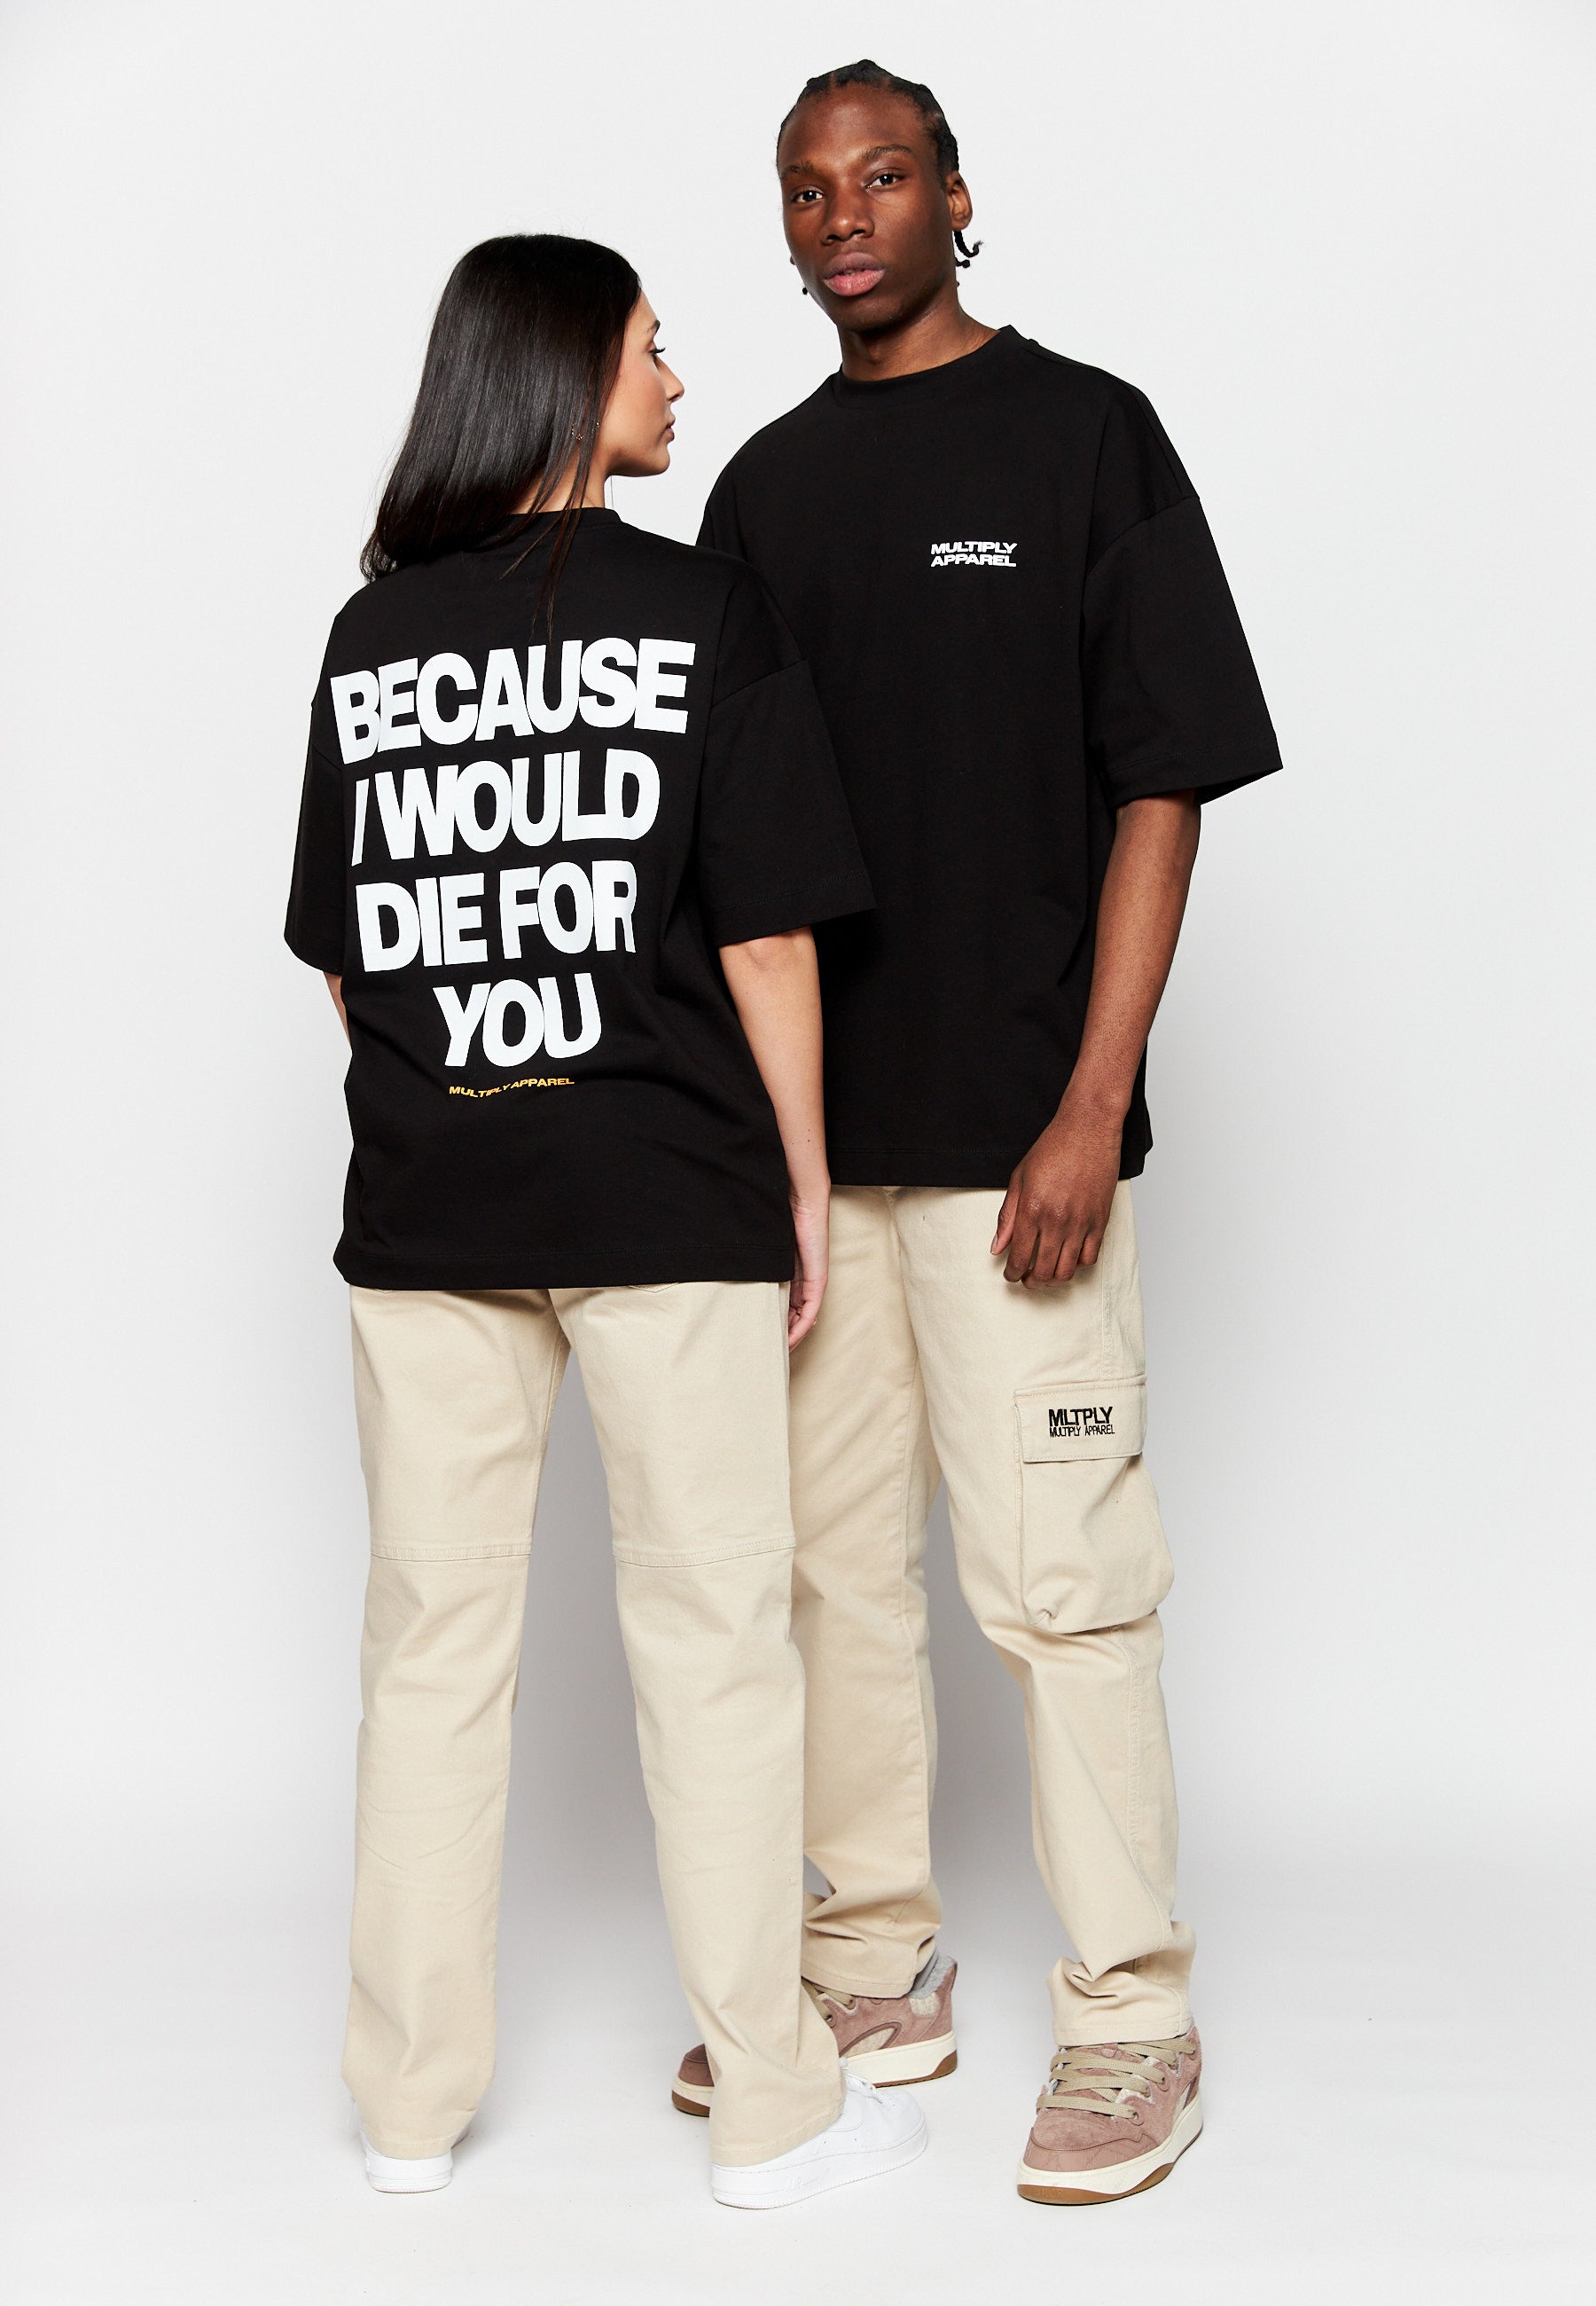 Oversize T-Shirt DIE FOR YOU Black